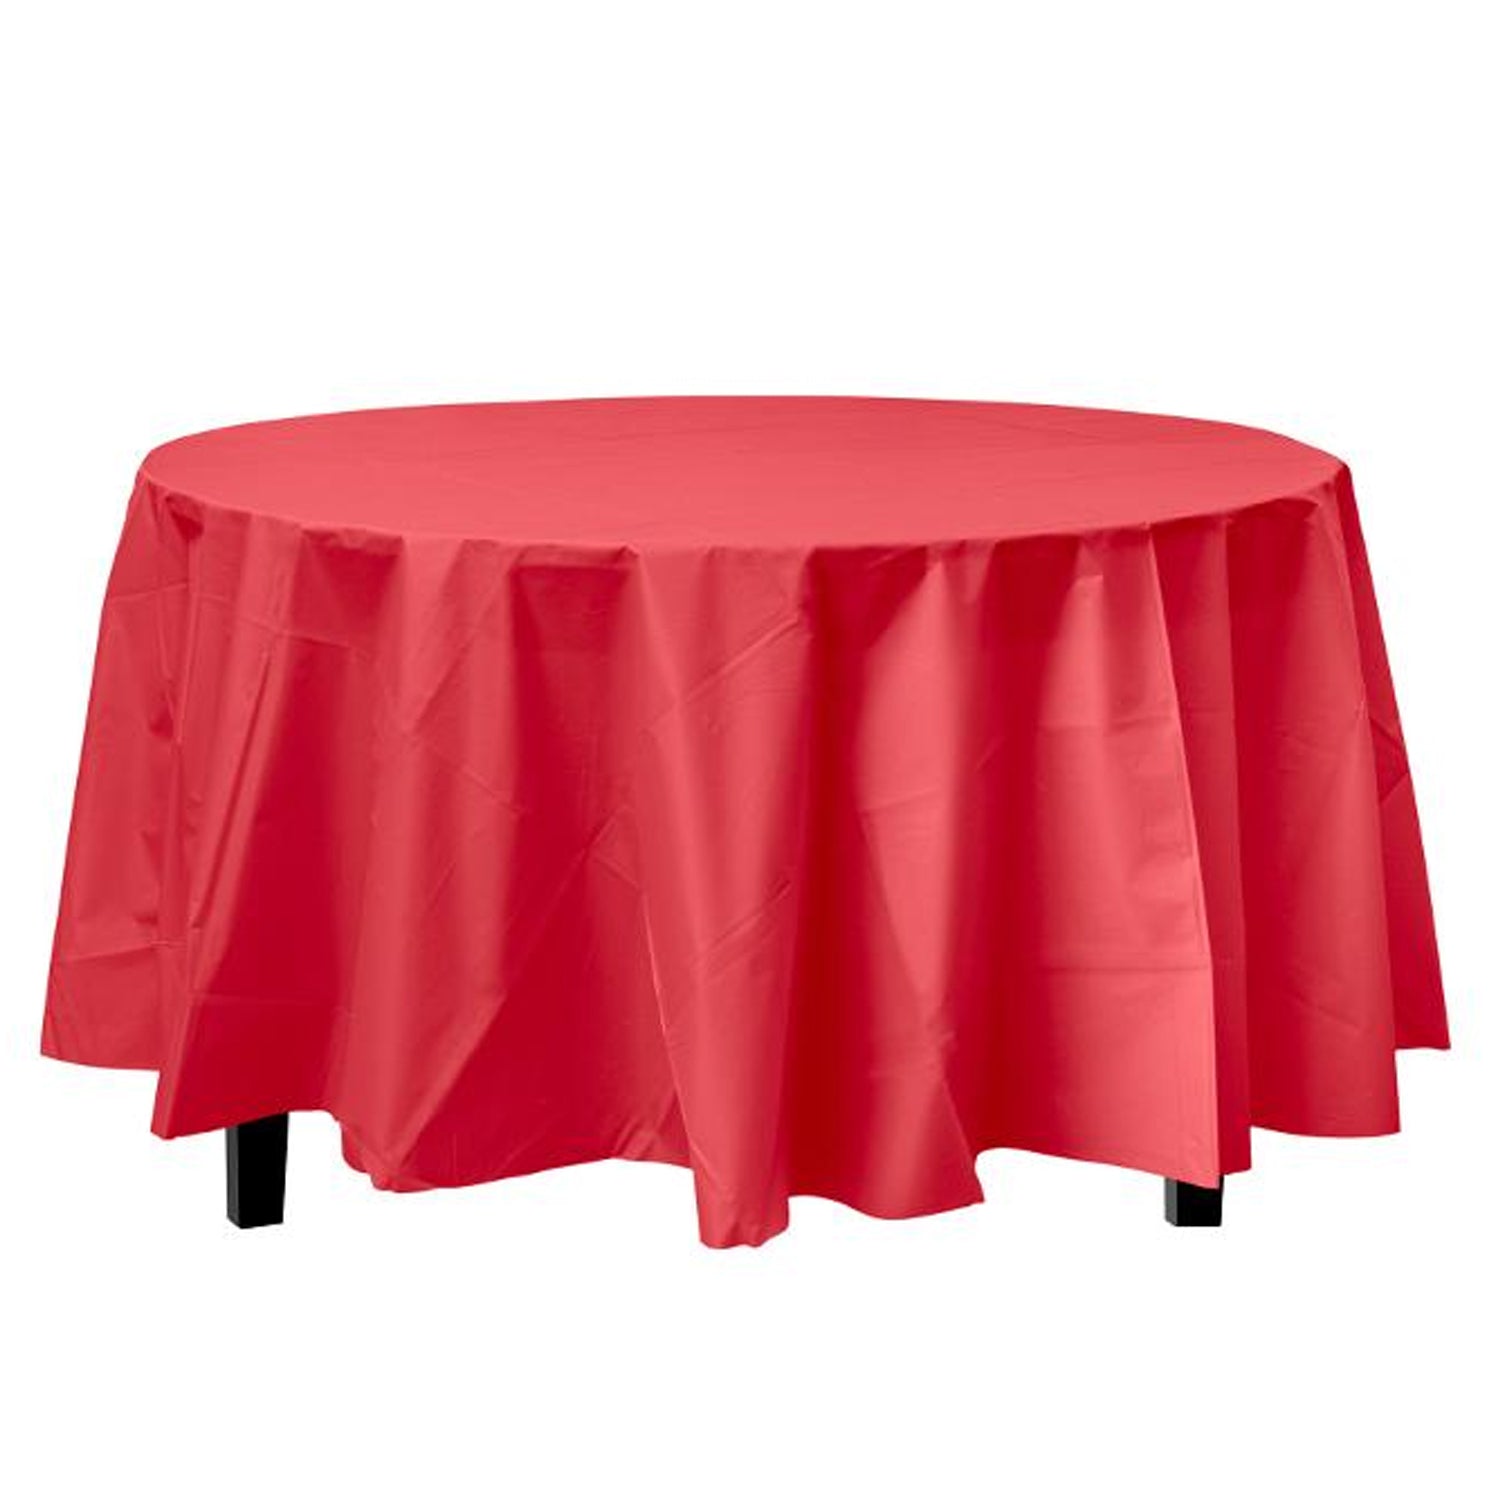 TableCloth Plastic Disposable Round Red 84'' Tablesettings Party Dimensions   